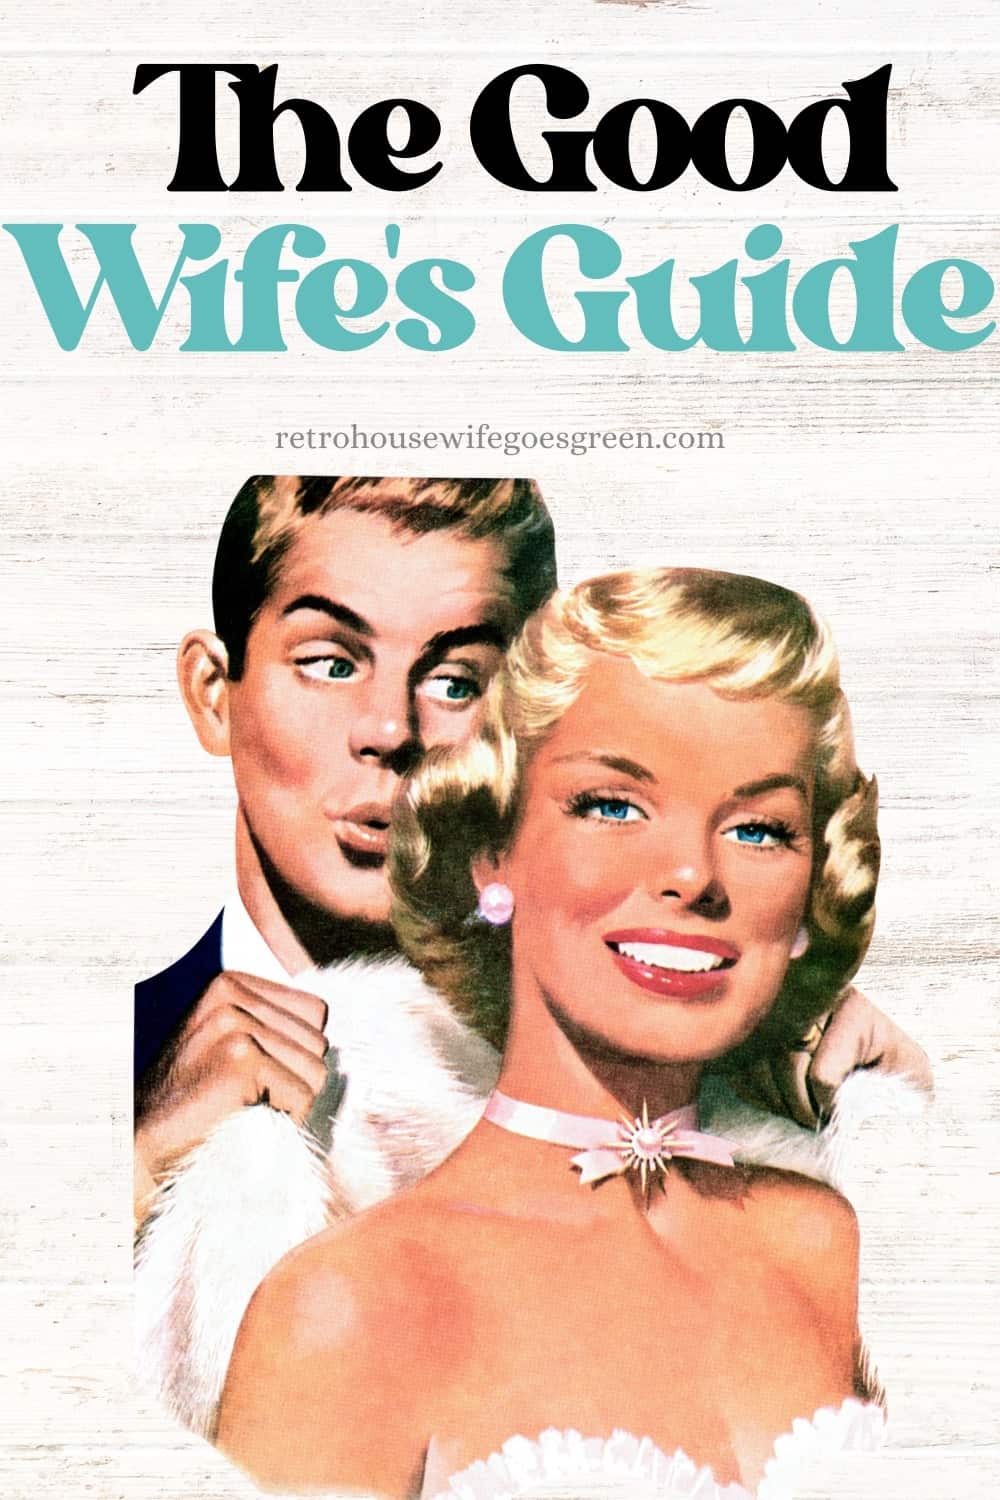 vintage graphic of husband looking at wife while helping her put on a coat with text the Good wife's guide